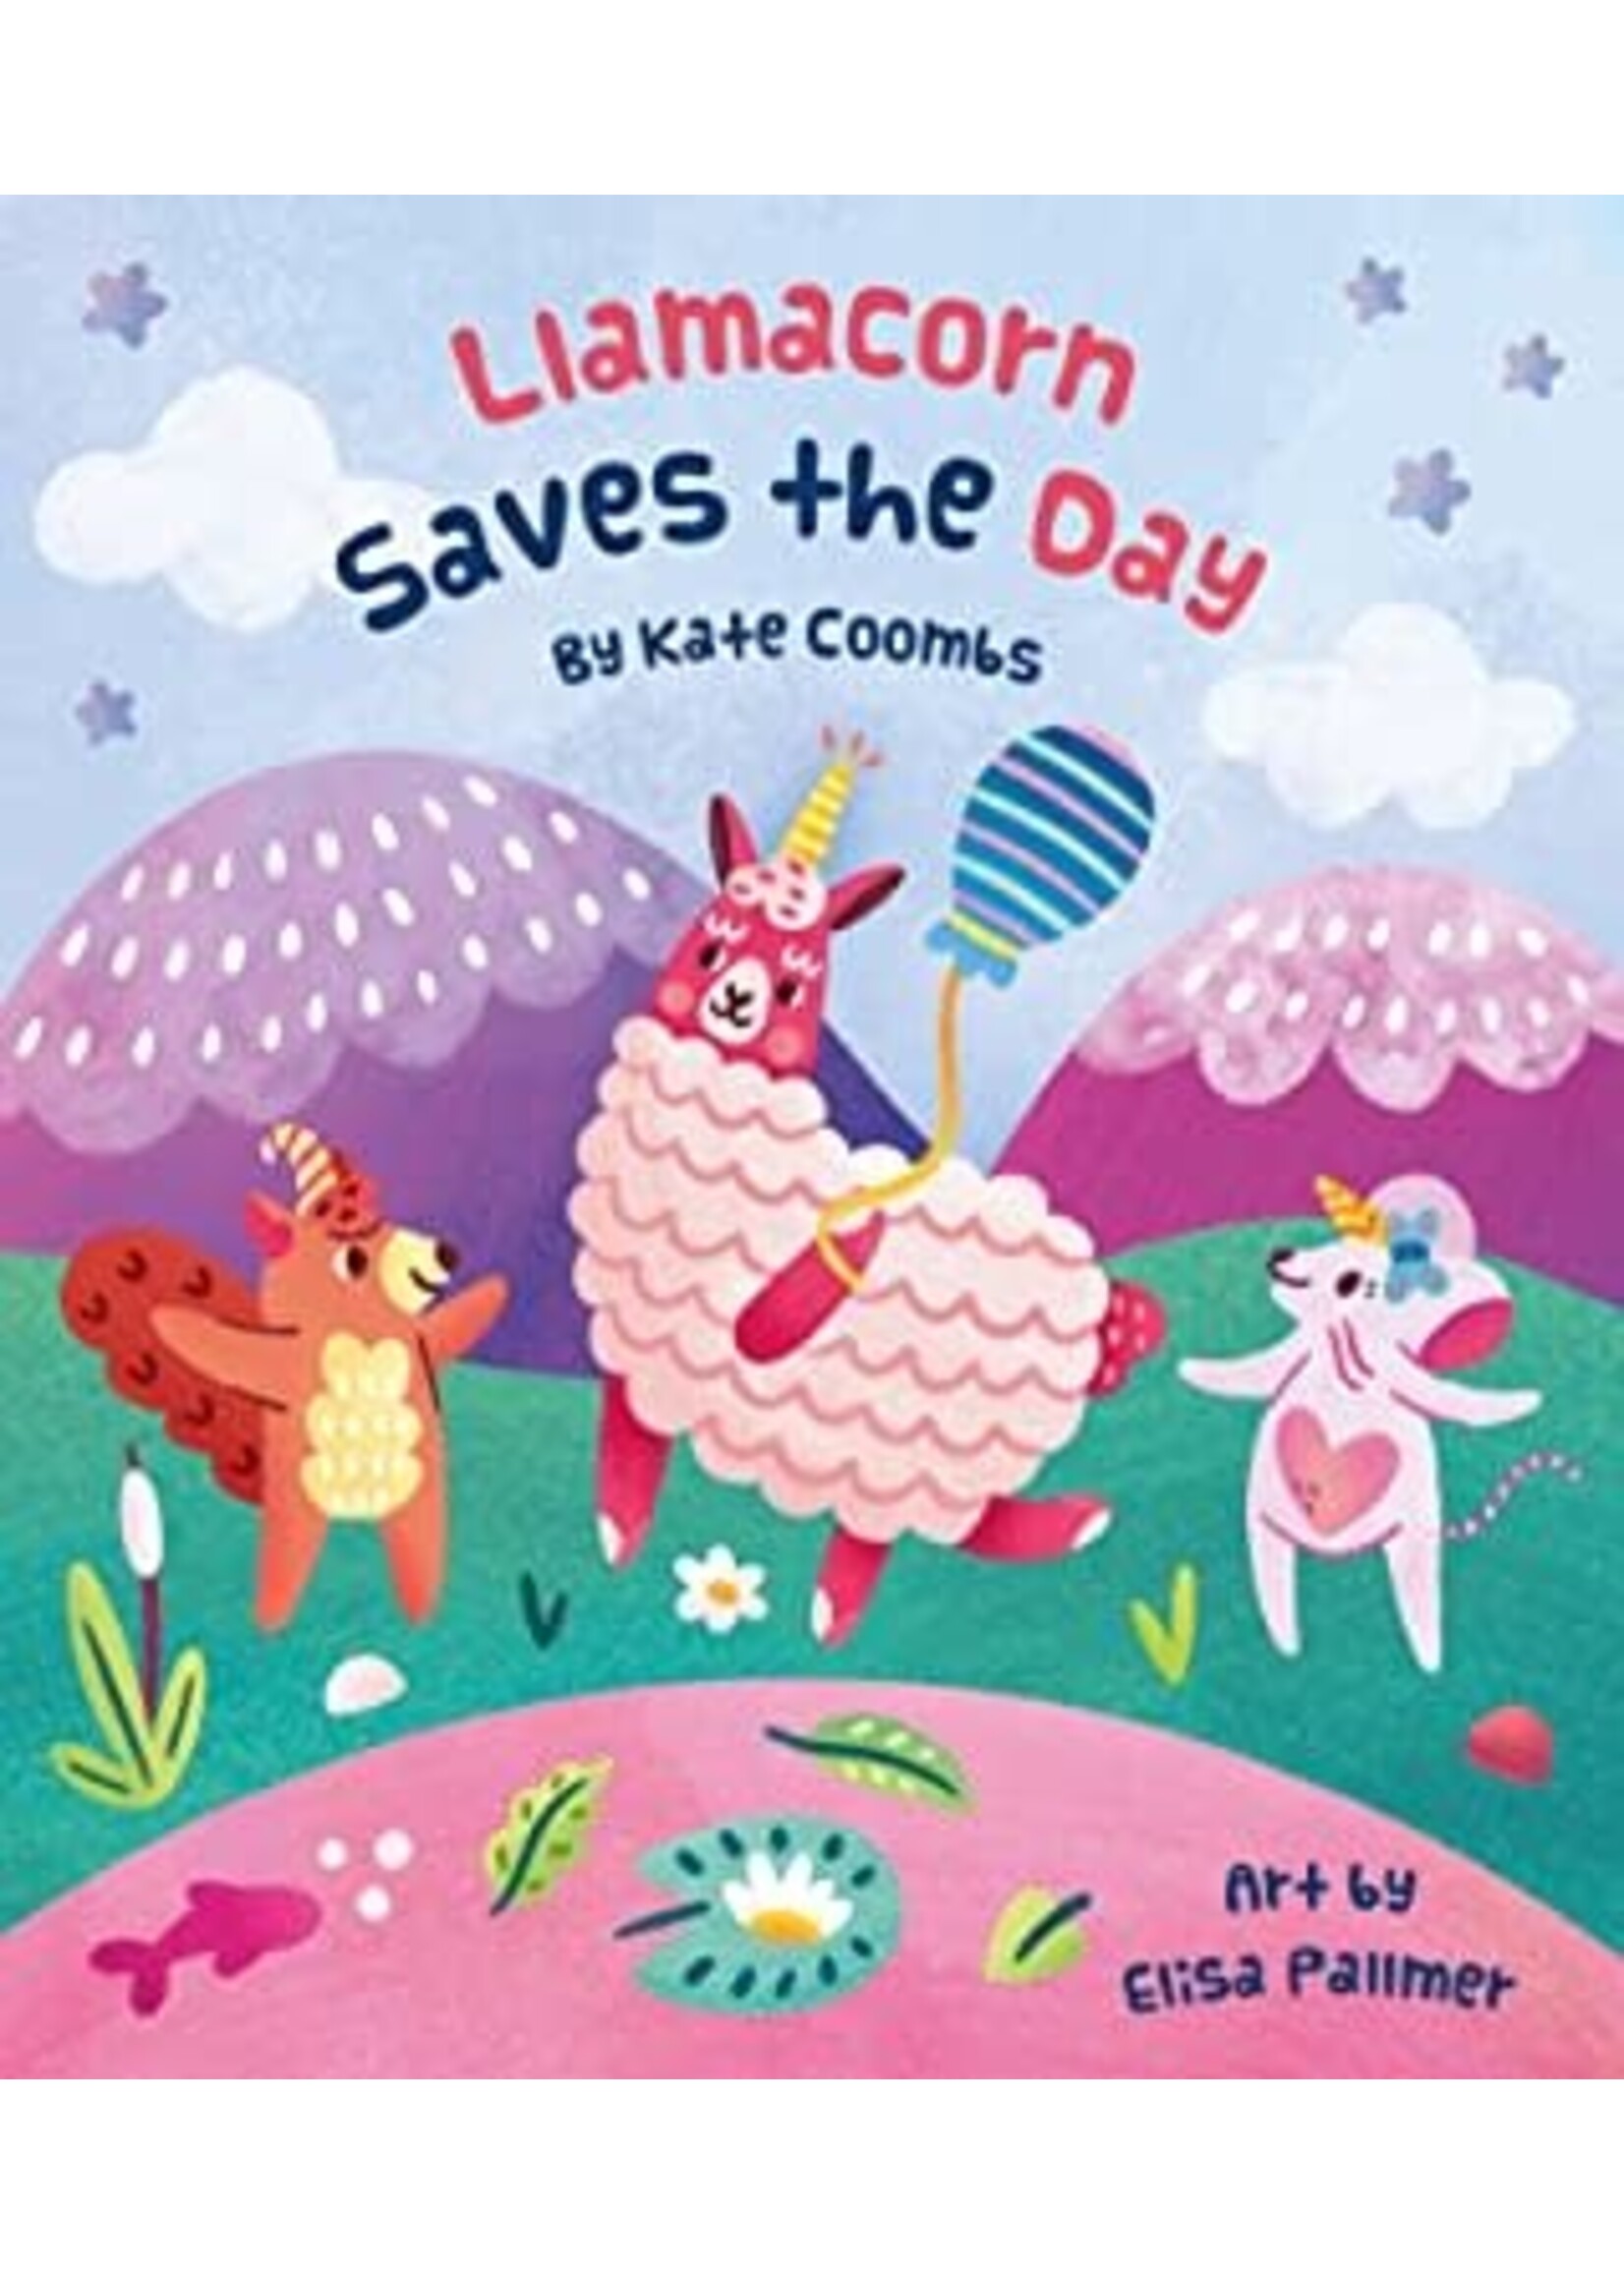 Llamacorn Saves the Day by Kate Coombs,  Elisa Pallmer